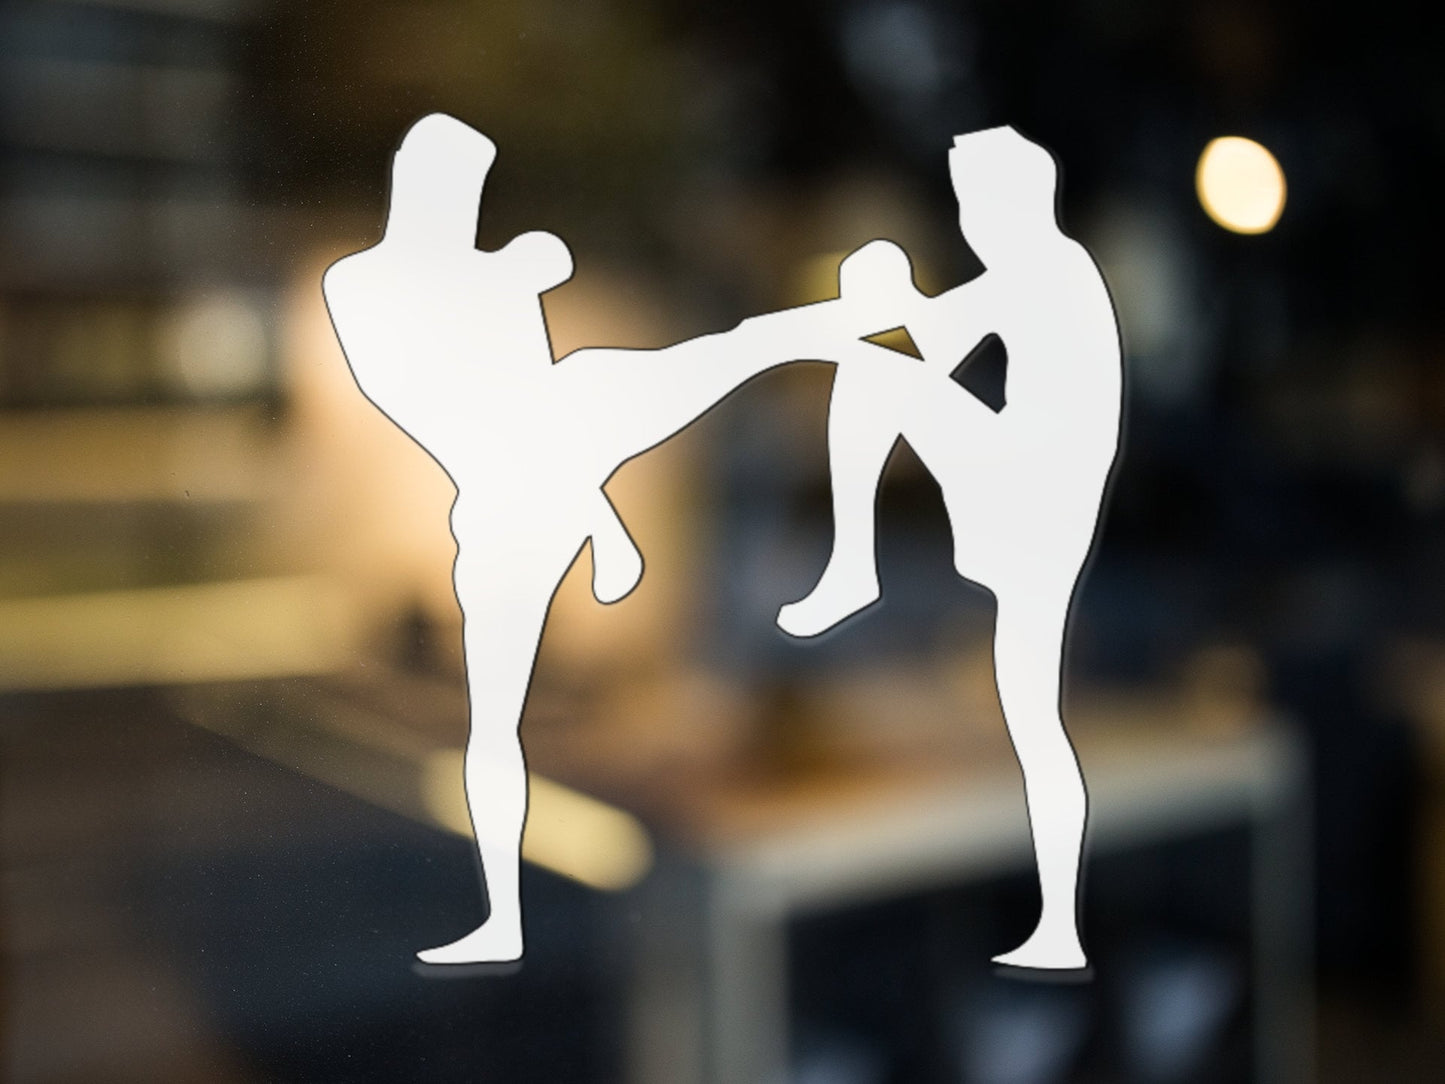 Kickboxing Fight Decal - Many Colors & Sizes